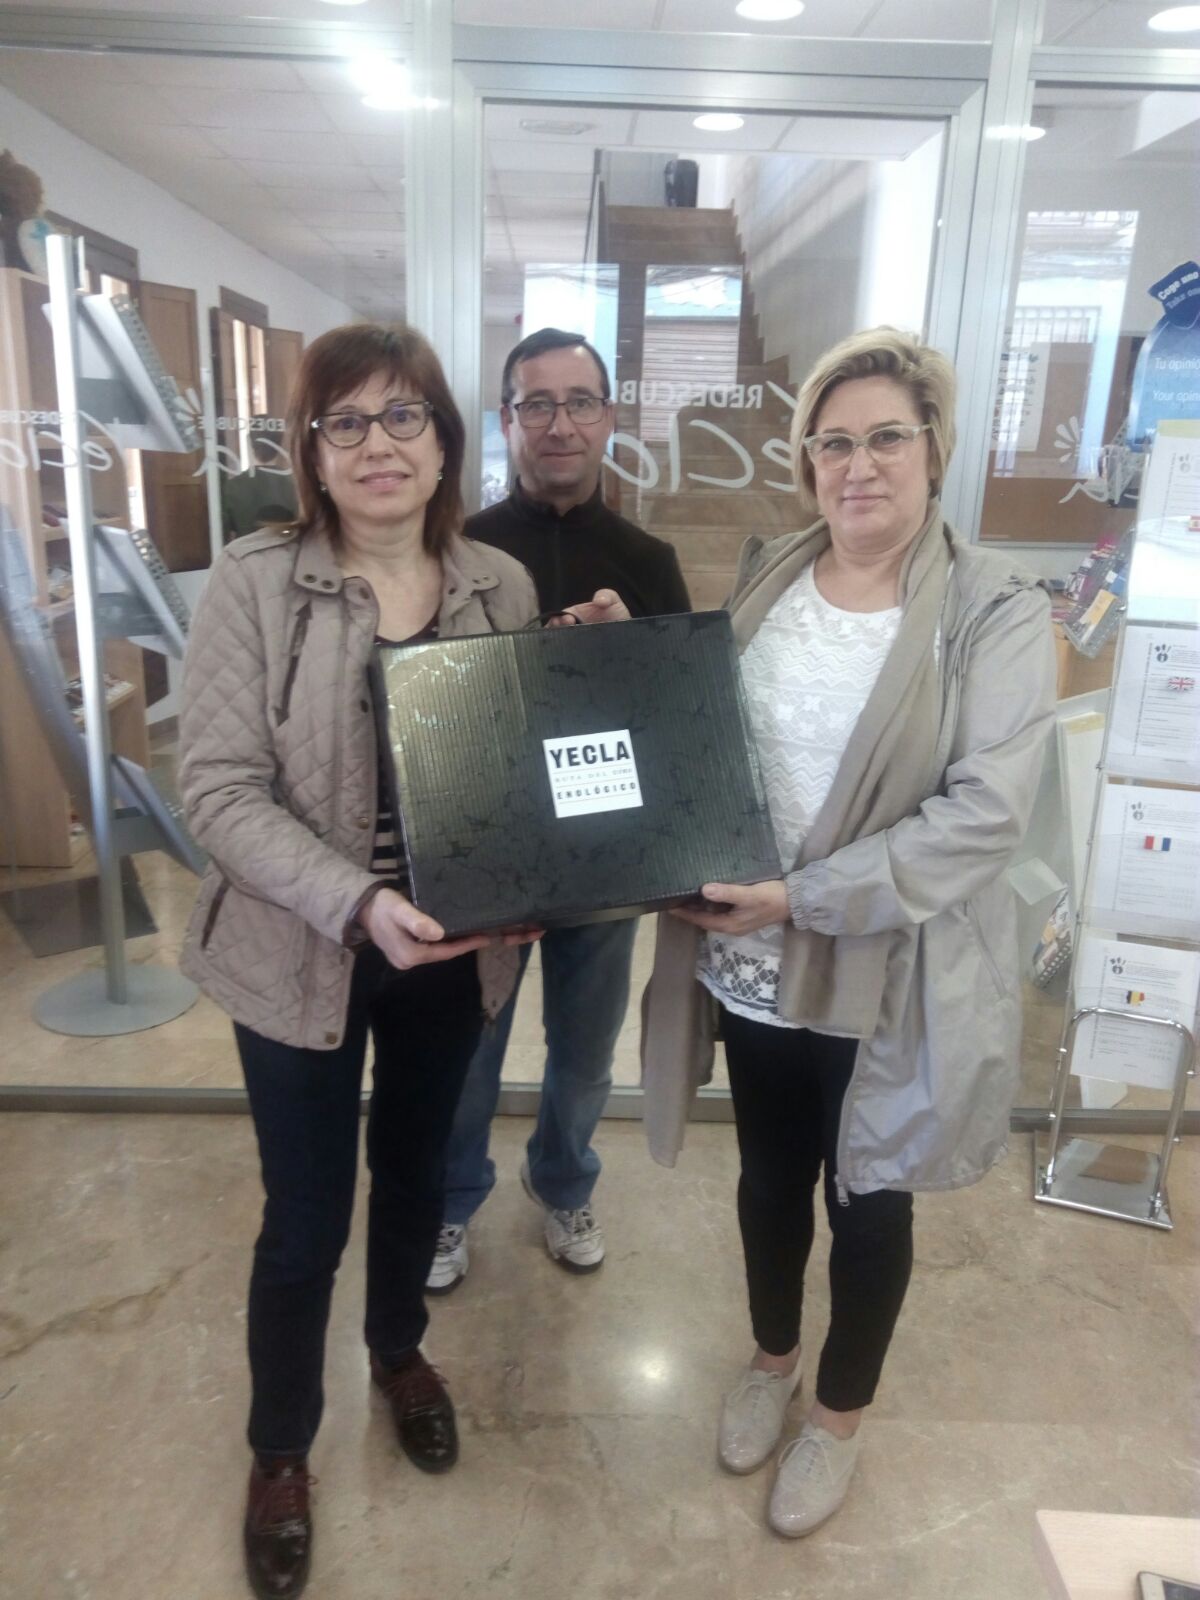 Delivery of Yecla wine route products in the first photo raffle